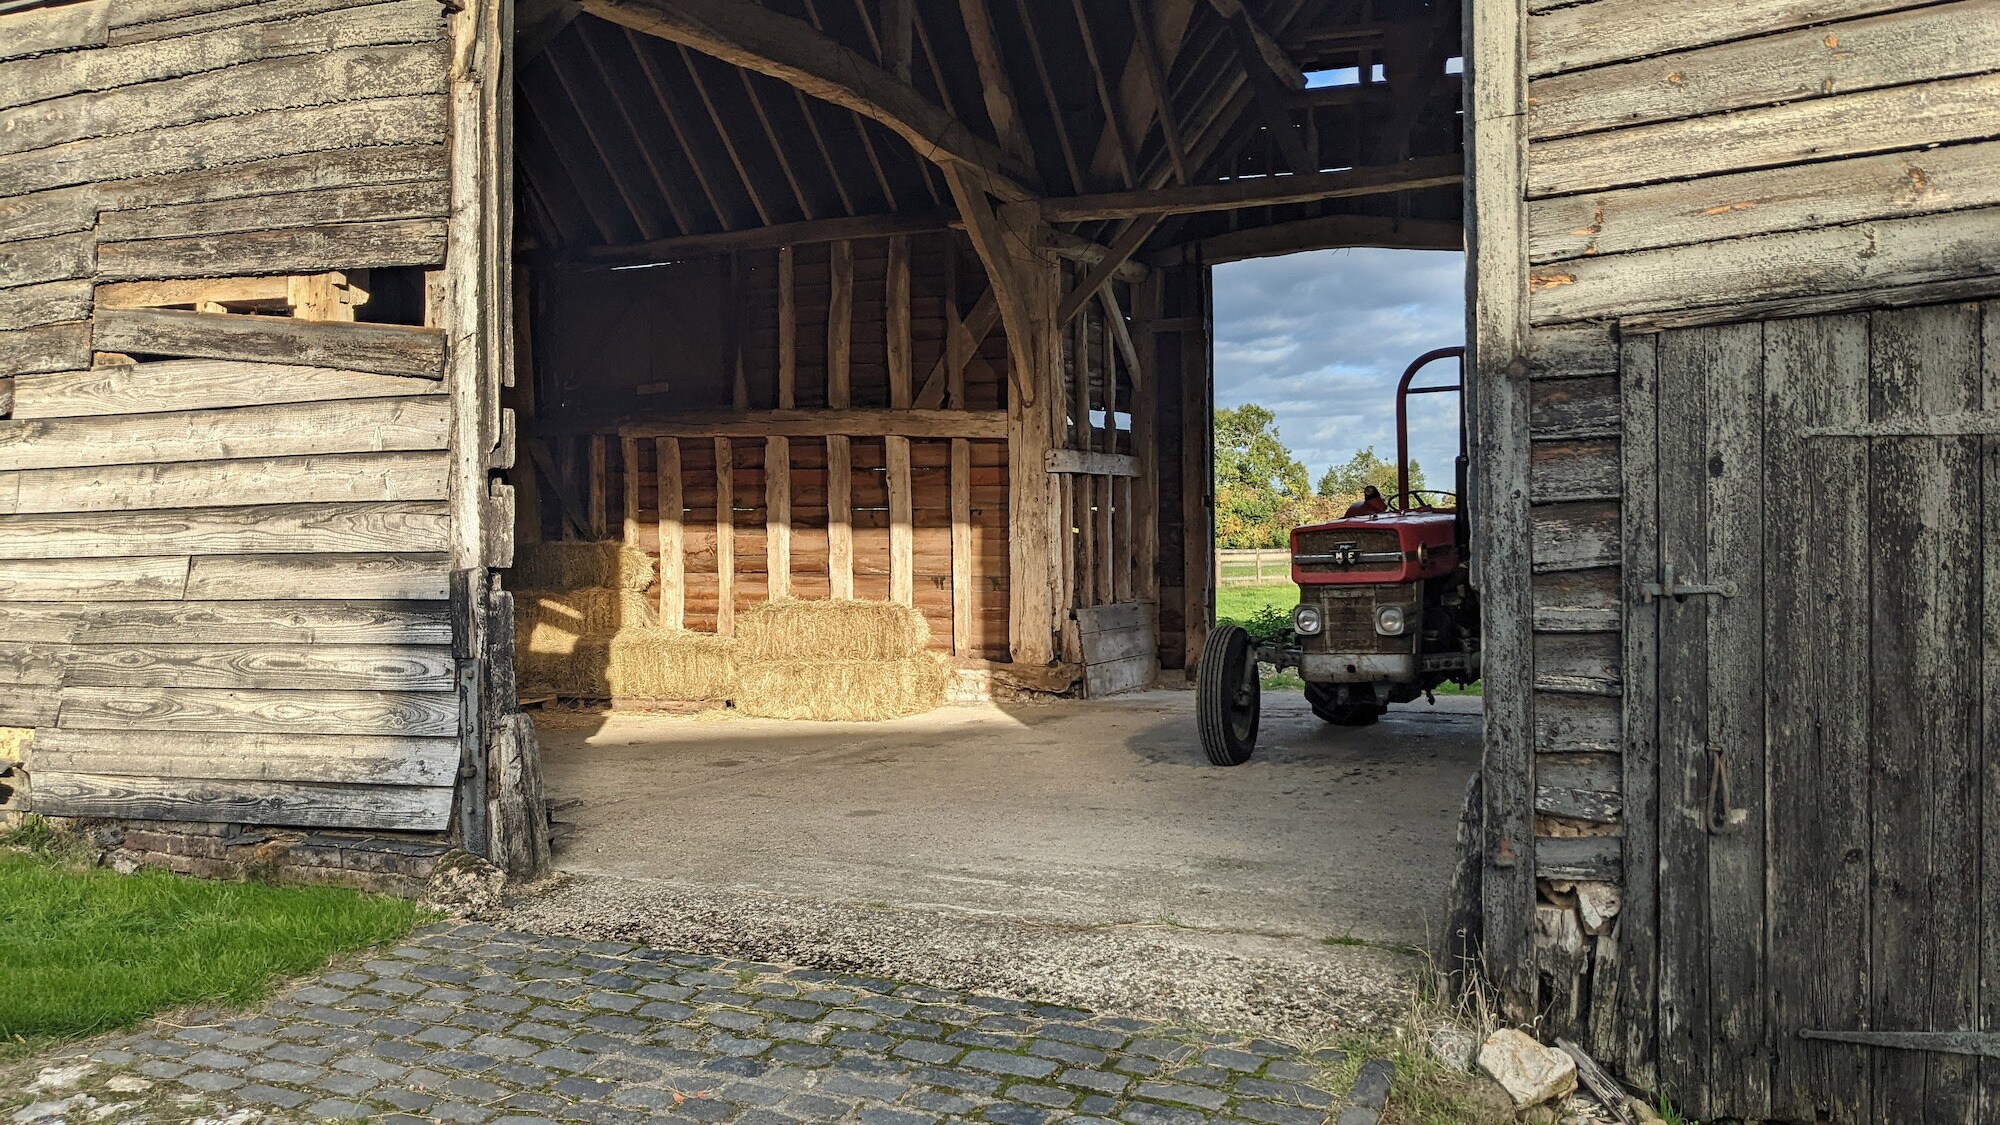 One of the main entrances to the hero barn is seen before the bumblebees fly passing through it during a photo shoot at Tenements Farm, Abbots Langley, UK for "The Busy Farm" episode of "A Real Bug's Life." (National Geographic/Nathan Small)